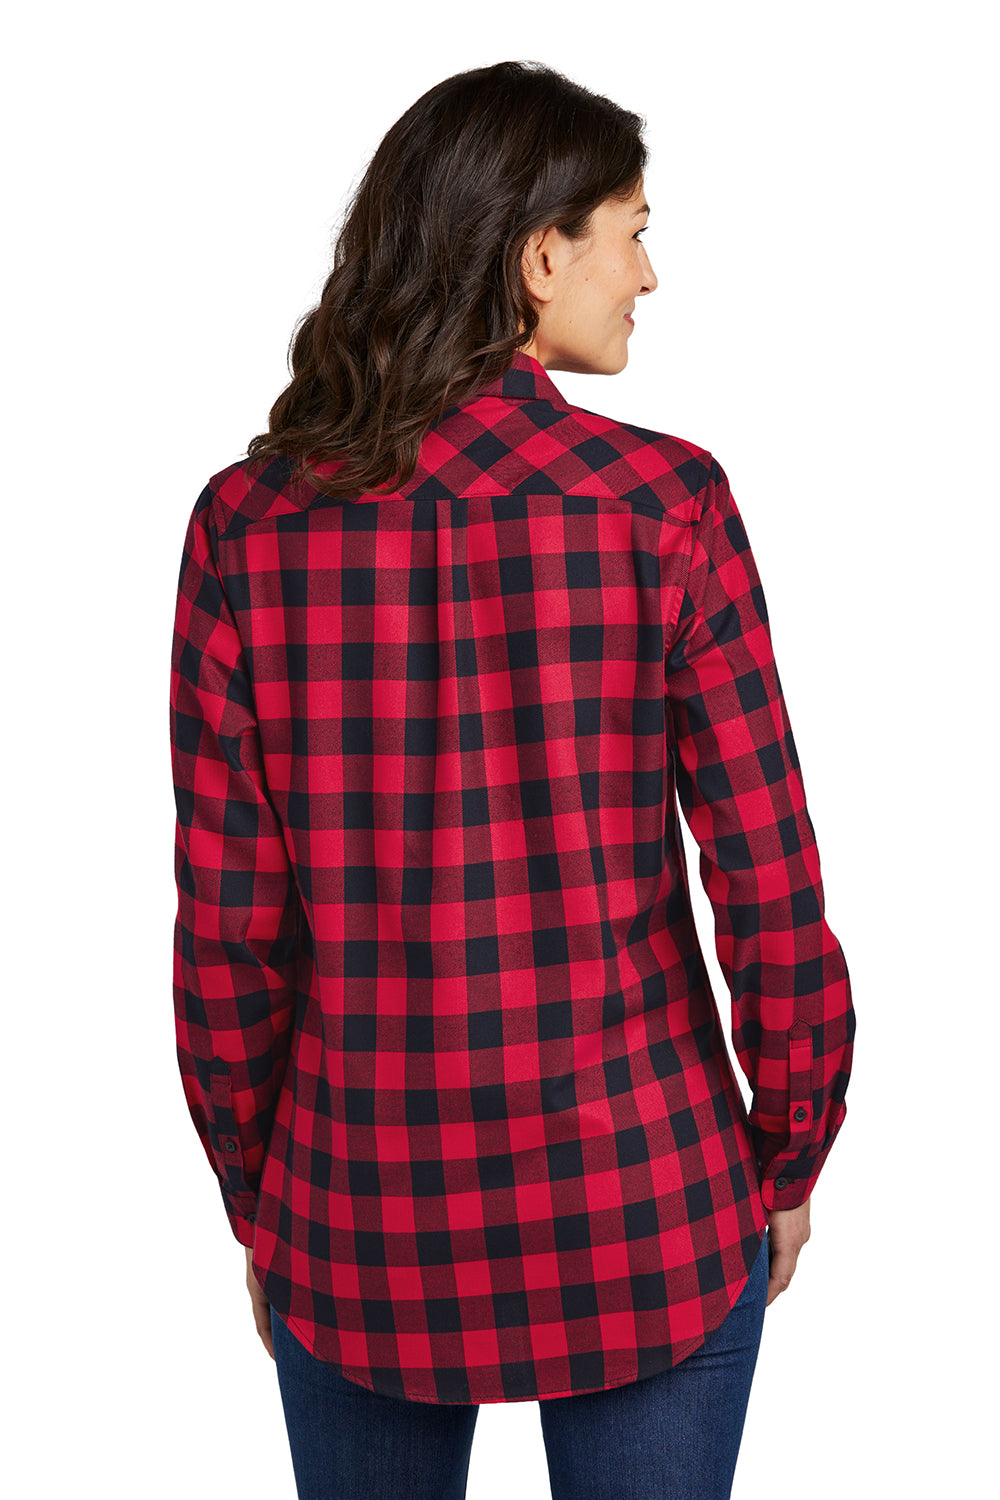 Port Authority LW668 Womens Flannel Long Sleeve Button Down Shirt Red/Black Buffalo Back